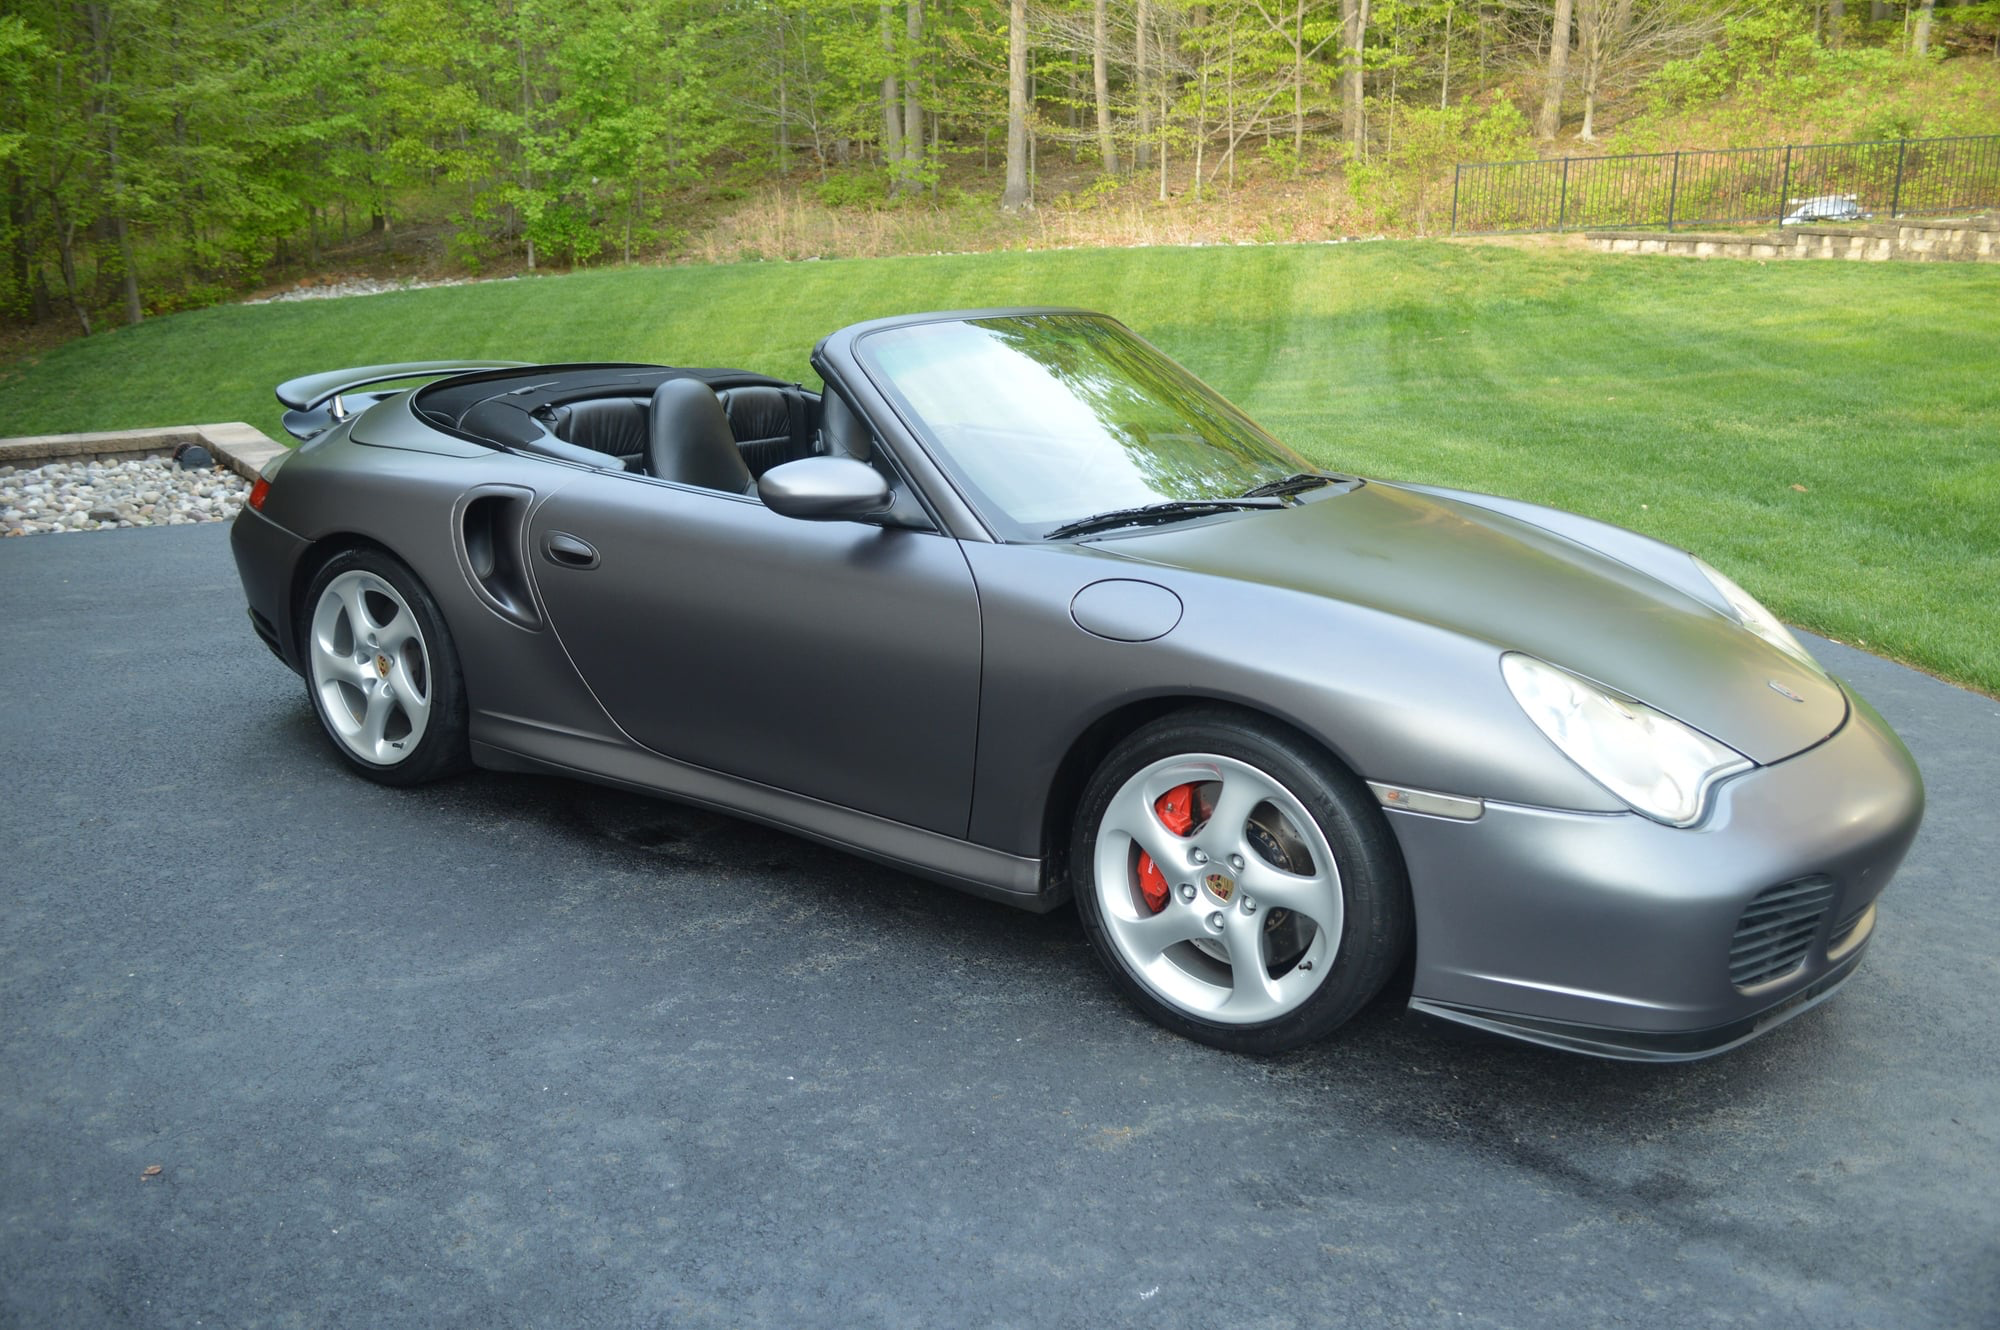 2004 Porsche 911 - 2004 Porsche 911 X-50 Turbo - 6SPD Cabriolet - Used - Perry Hall, MD 21128, United States